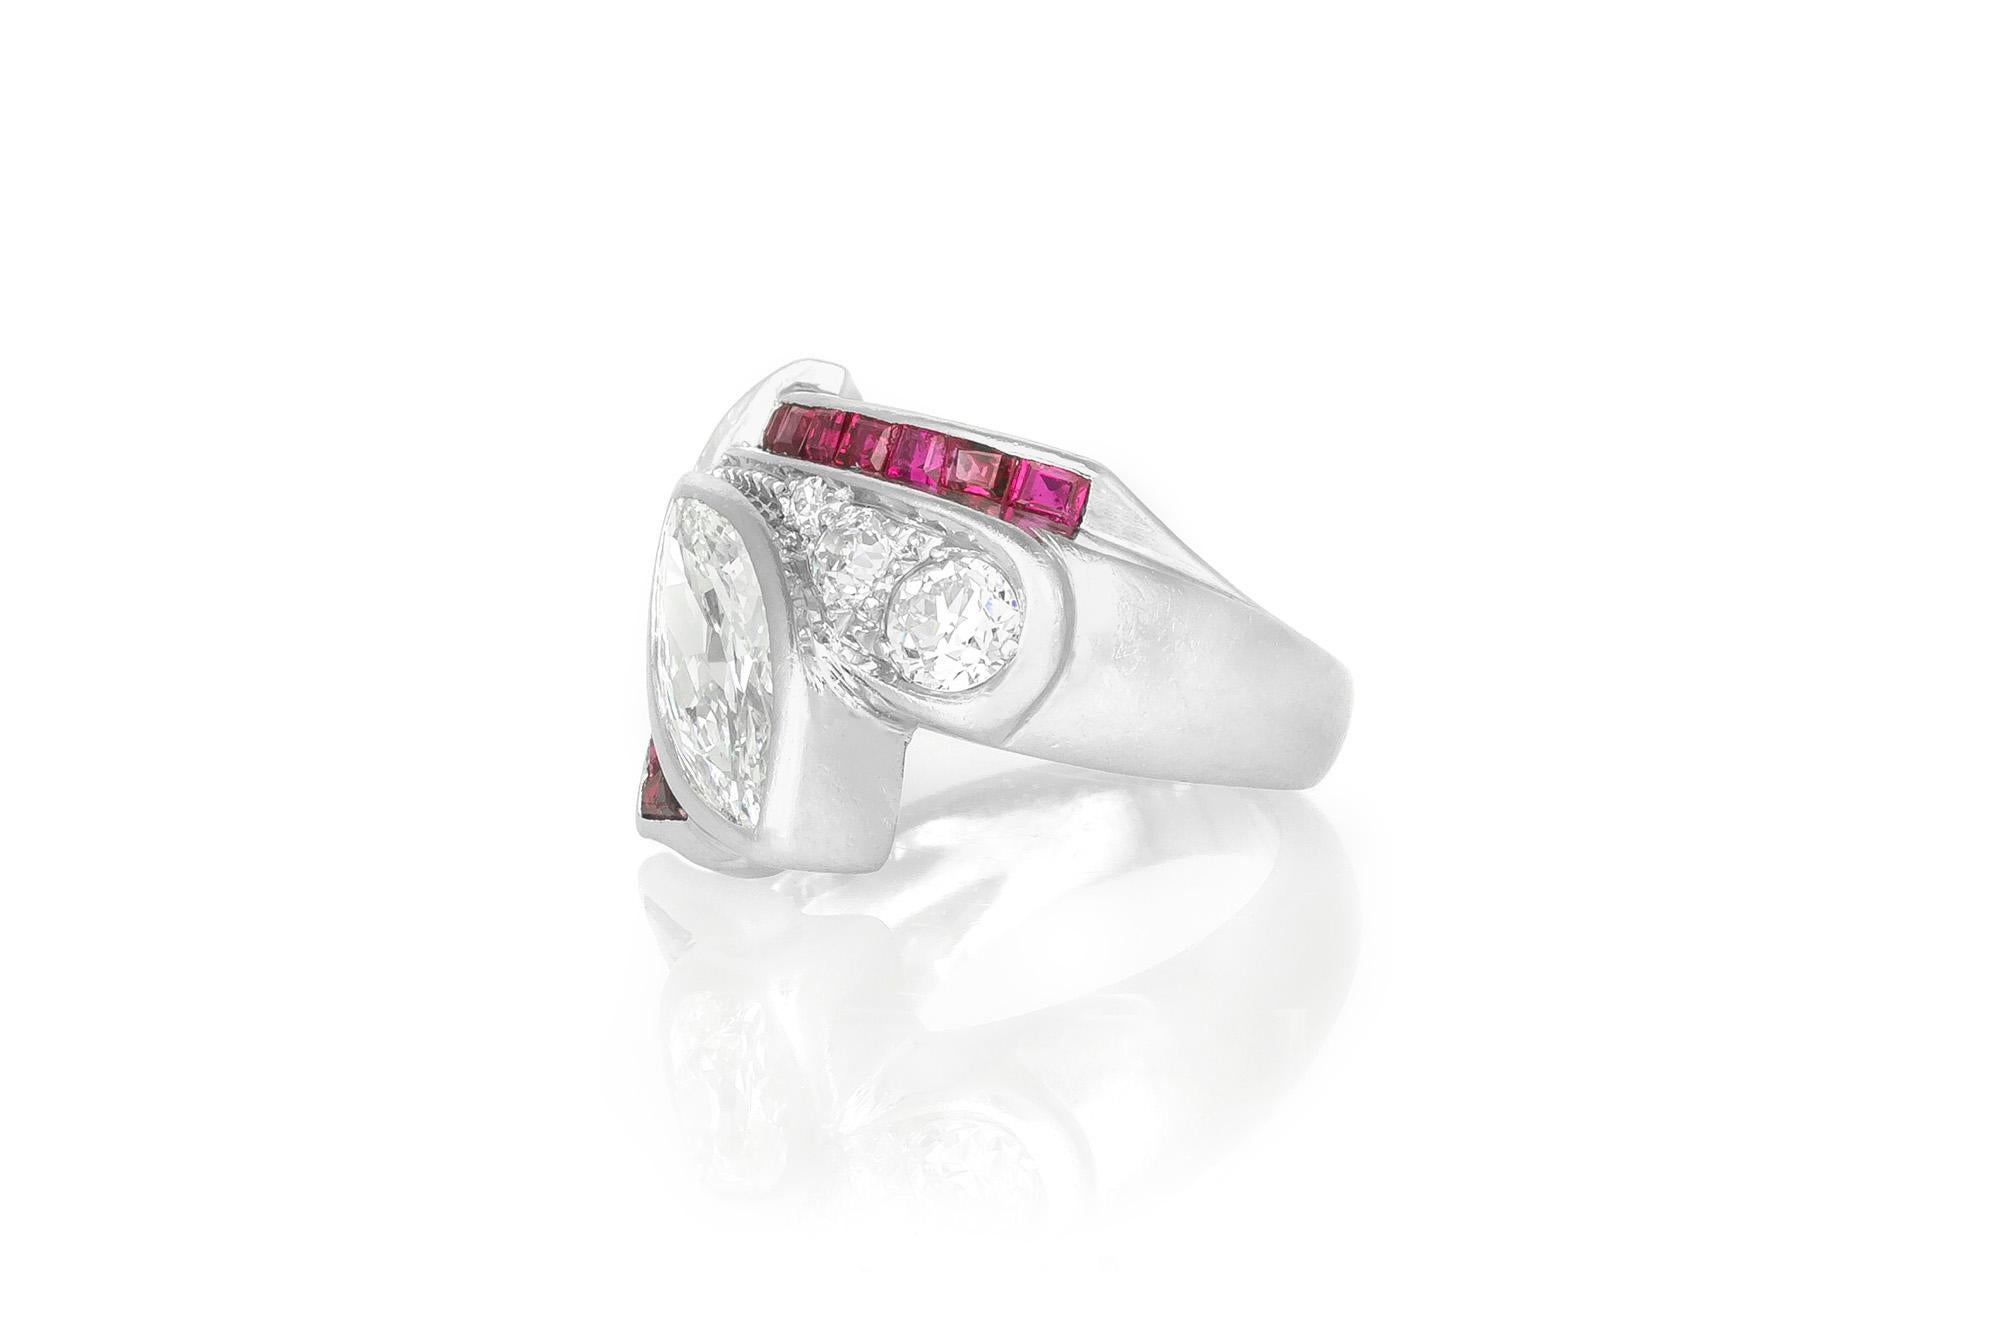 Finely crafted in platinum with a center marquise cut diamond weighing 1.25 carats.
The ring features 1.20 carats of square cut rubies and 0.50 carats of round brilliant cut diamonds.
Size 4, resizable
